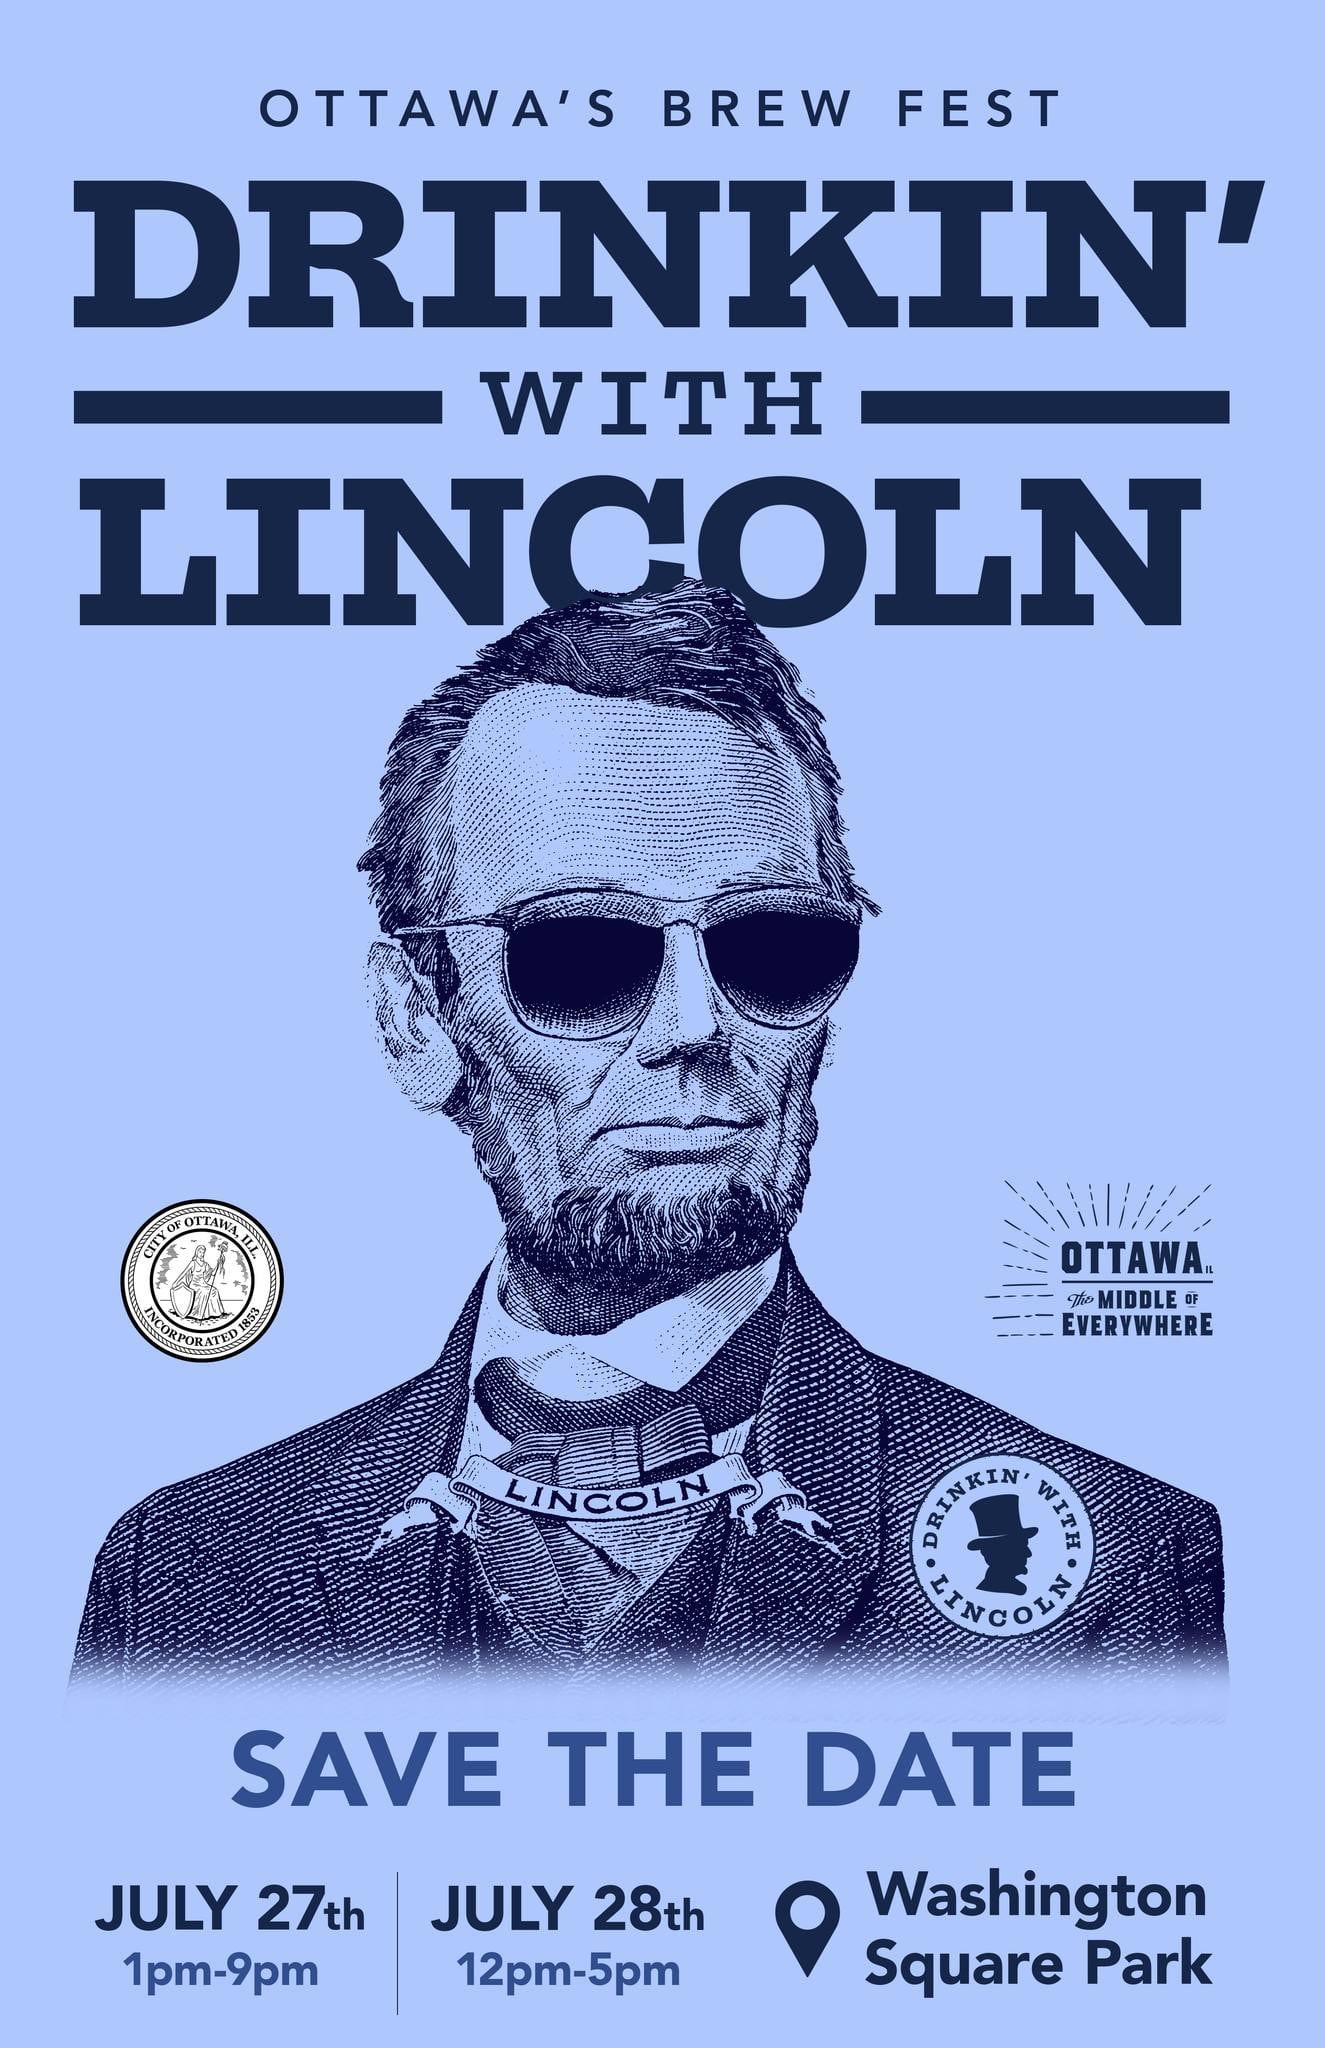 10+ breweries and wineries to be featured at Drinkin’ with Lincoln